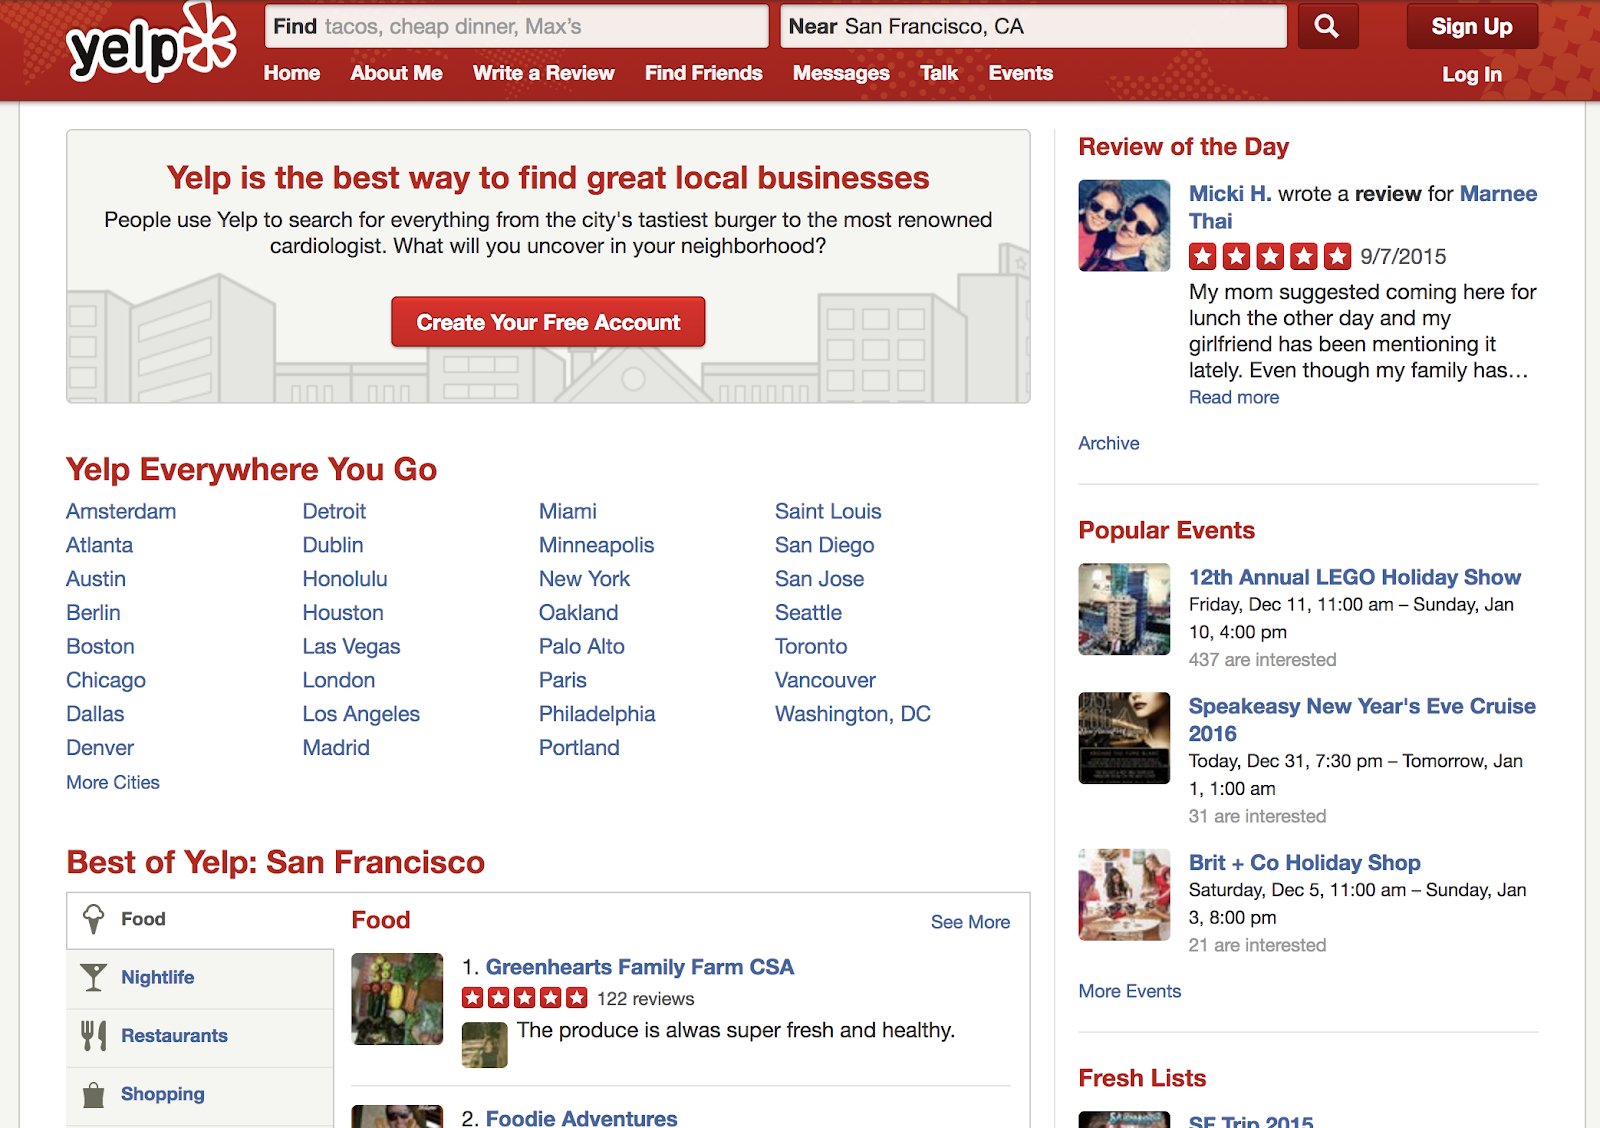 screenshot of experience-based information on yelp.com